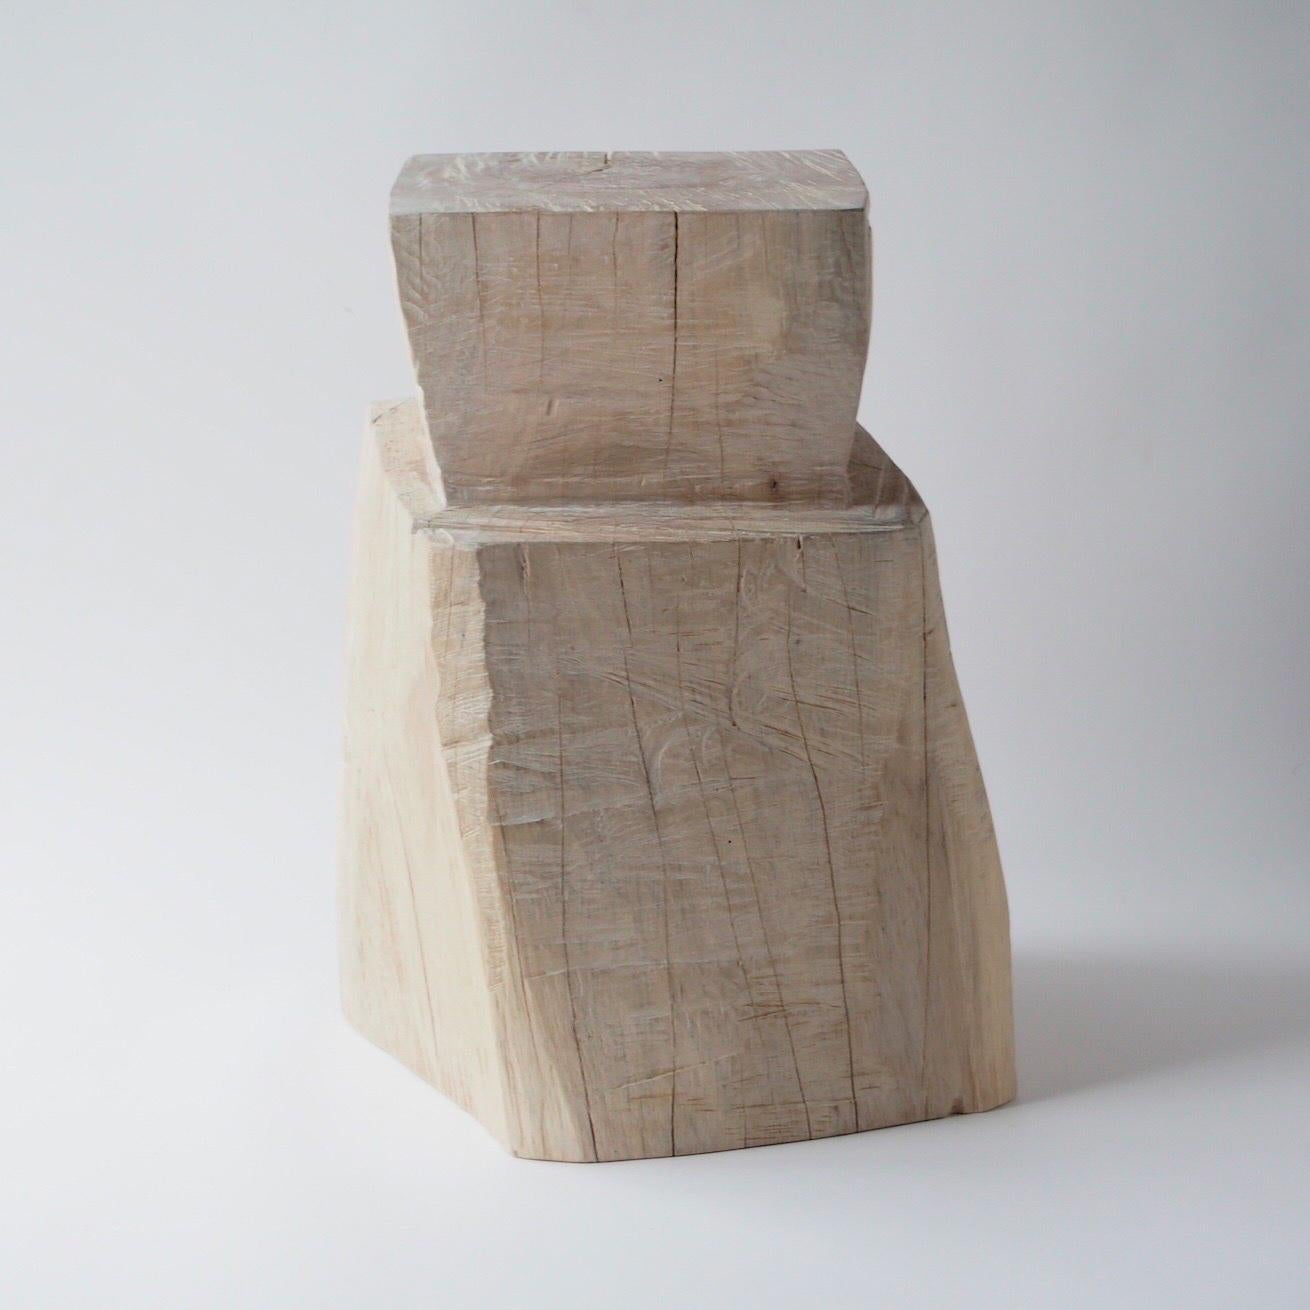 Name: Nougat
Sculptural stool by Hiroyuki Nishimura and zone carved furniture
Material: Zelkova
This work is carved from log with some kinds of chainsaws.
Most of wood used for Nishimura's works are unable to use anything, these woods are